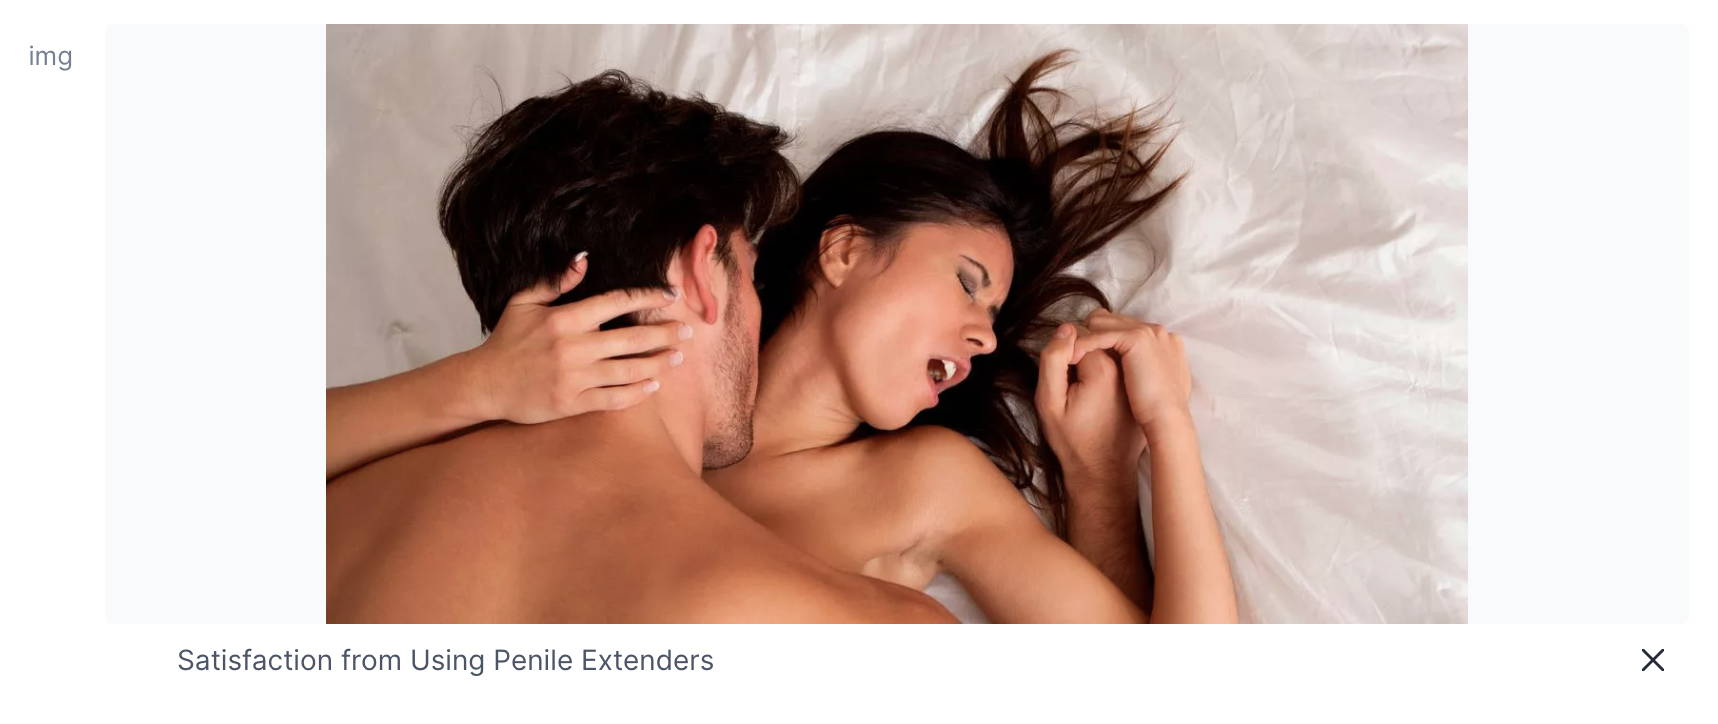 Satisfaction from Using Penile Extenders